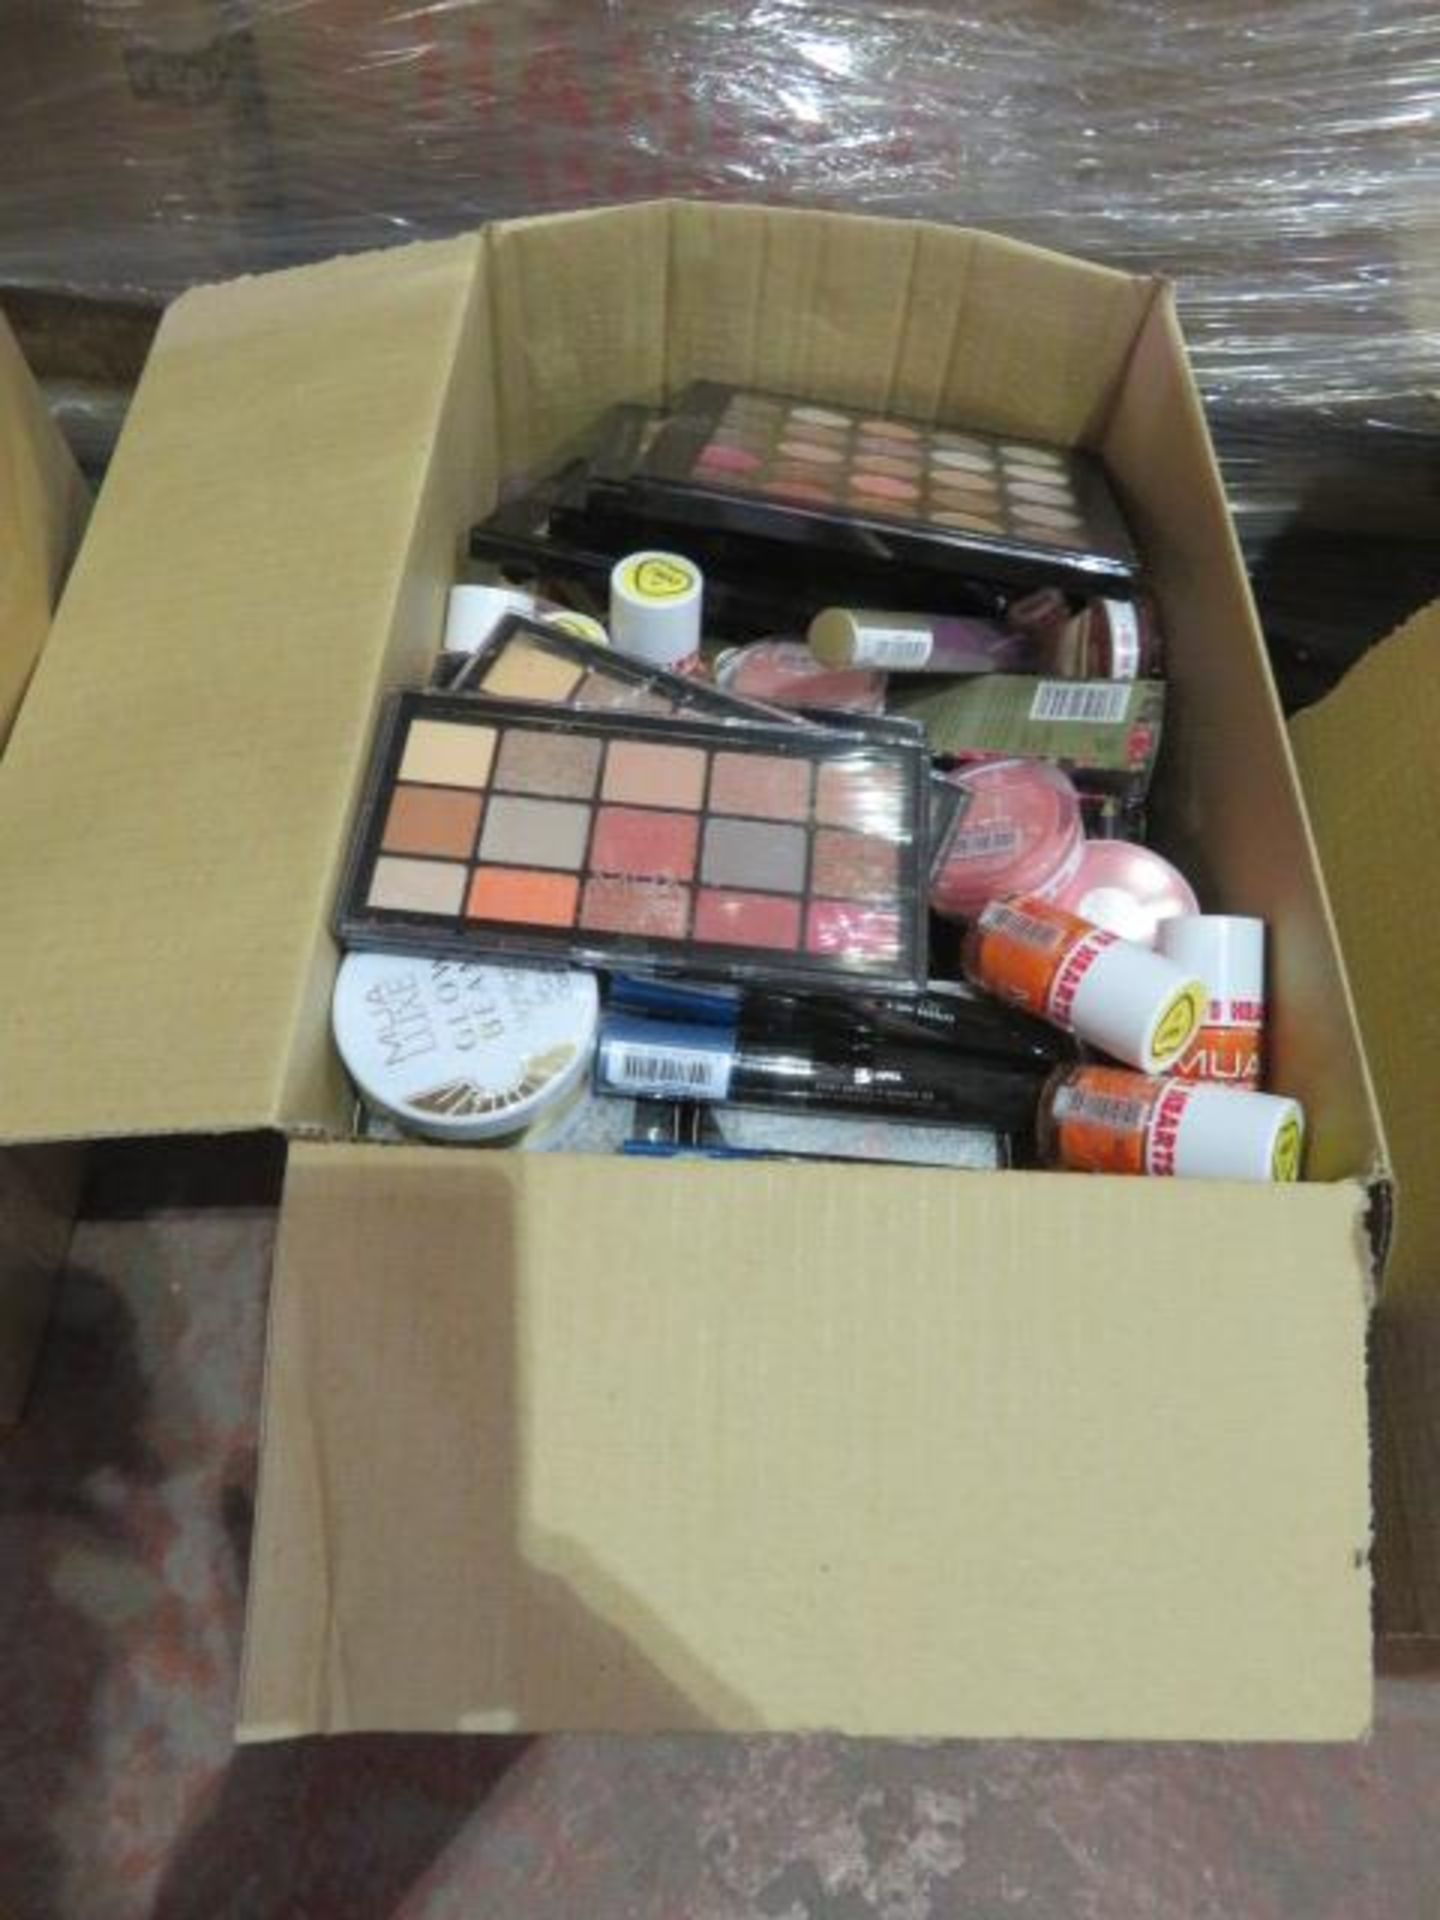 Circa. 200 items of various new make up acadamy make up to include: glow beam highlighting powder, - Image 2 of 2